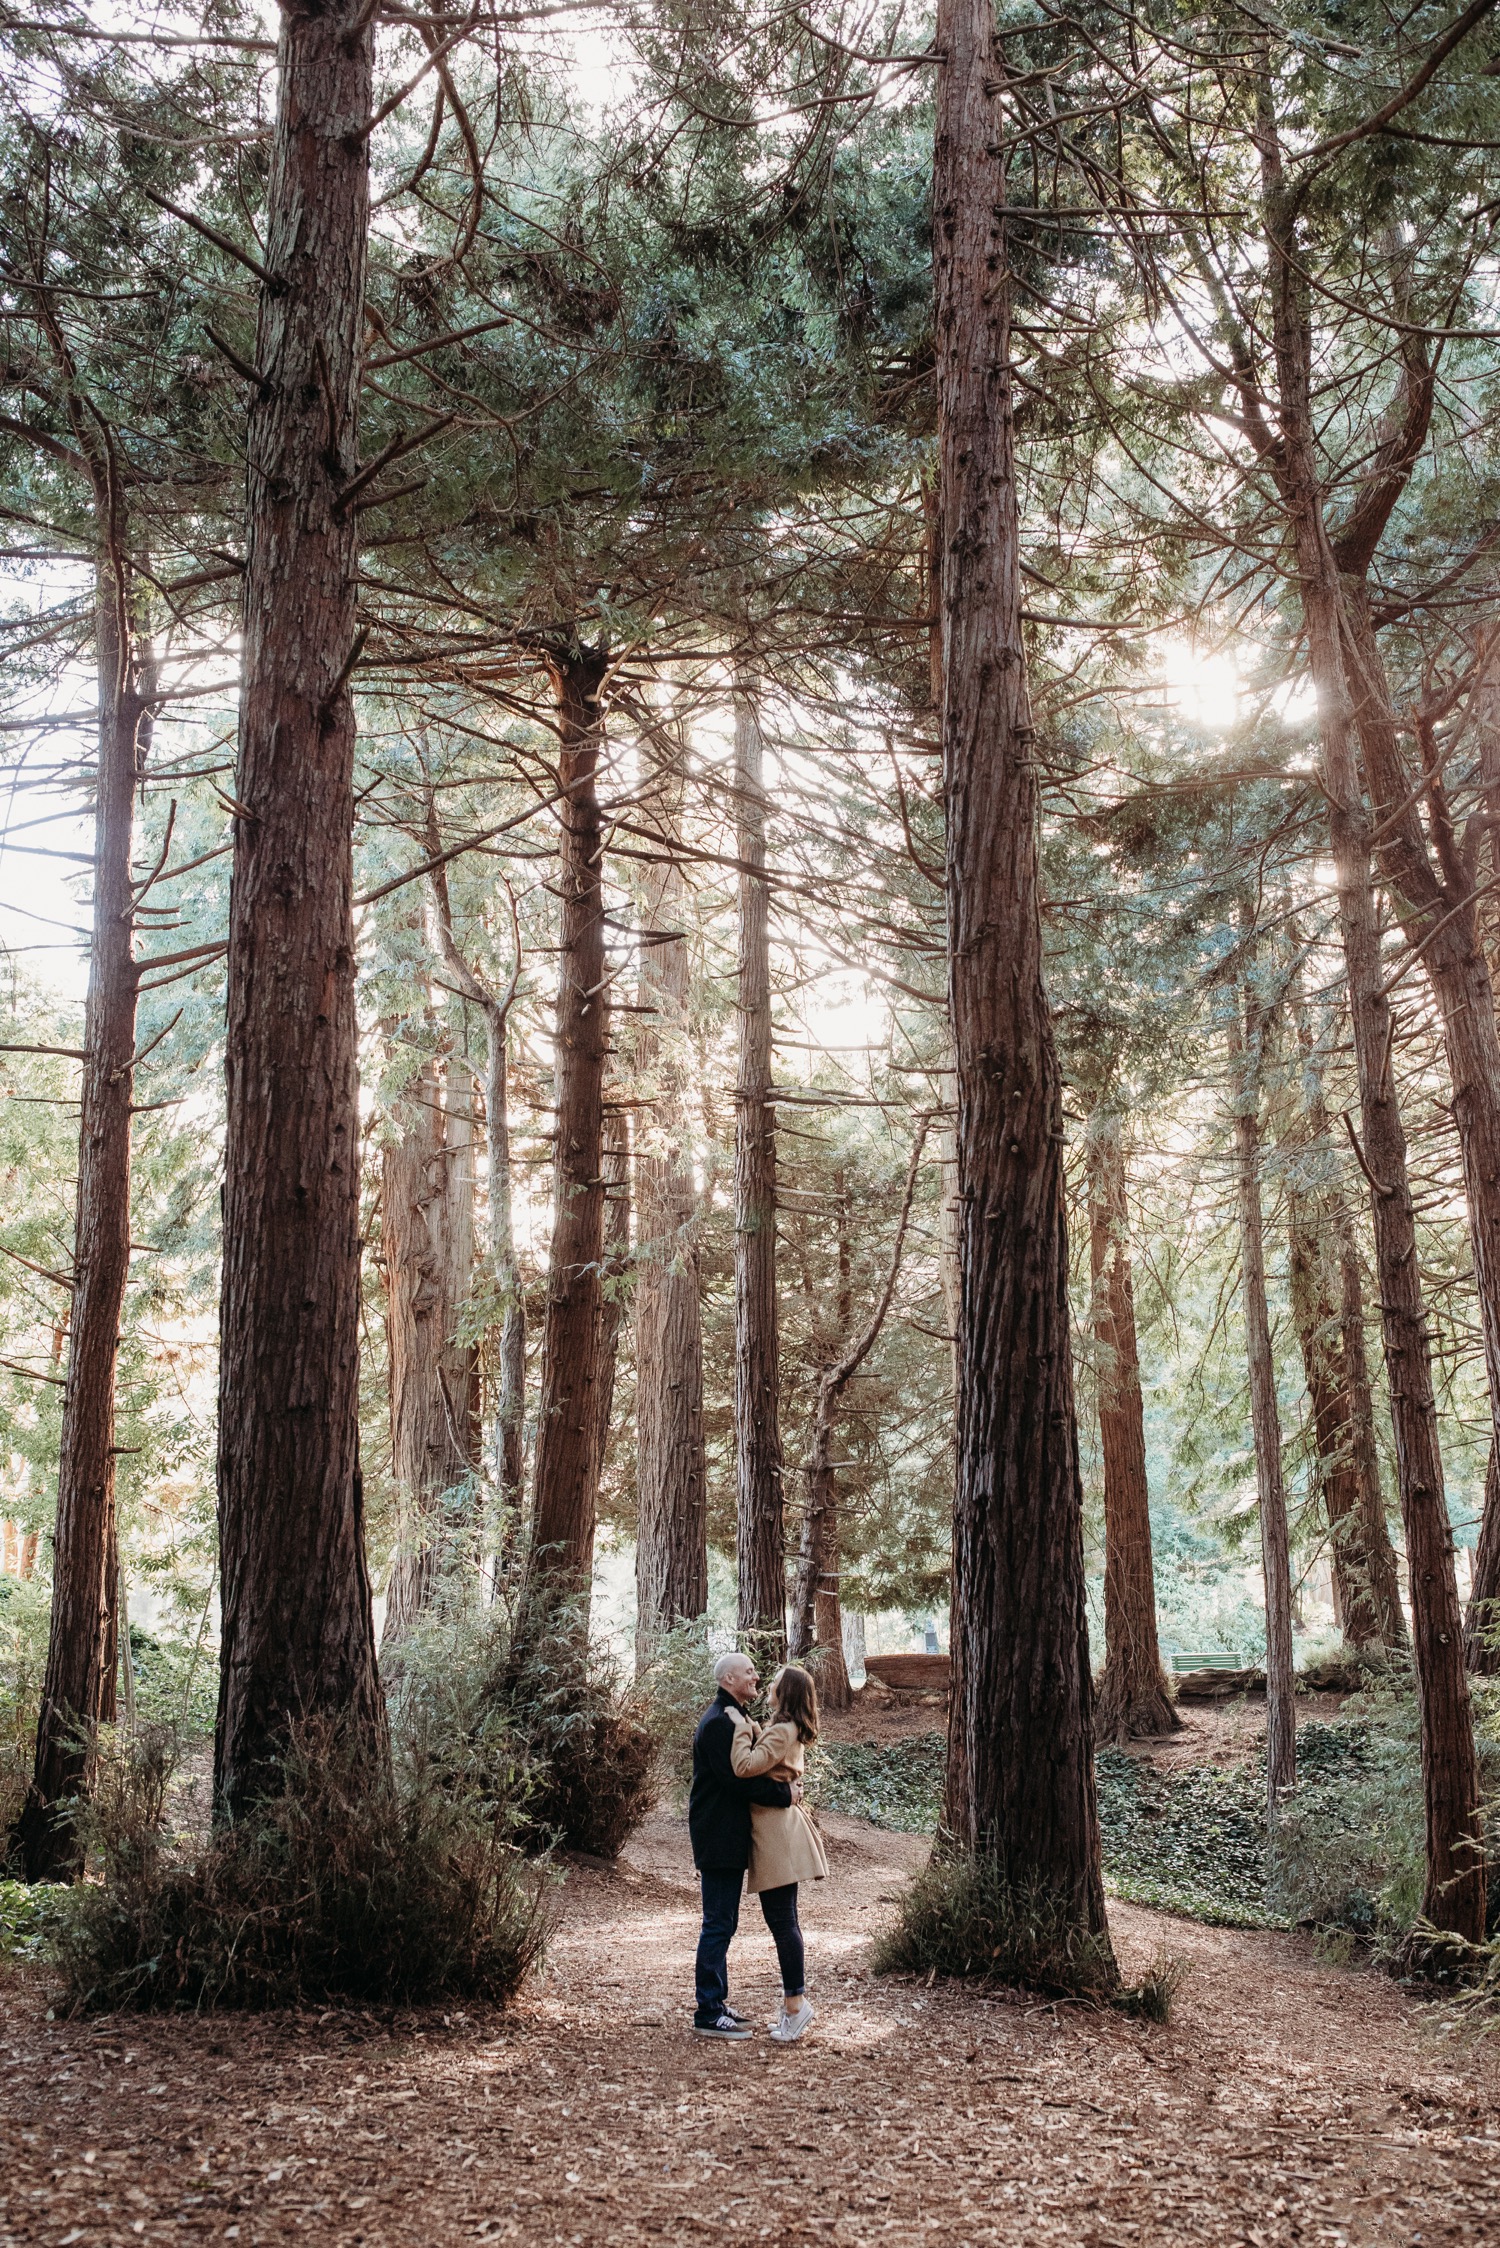 Couple hugs while standing in towering redwoods during their Golden Gate Park engagement photoshoot.